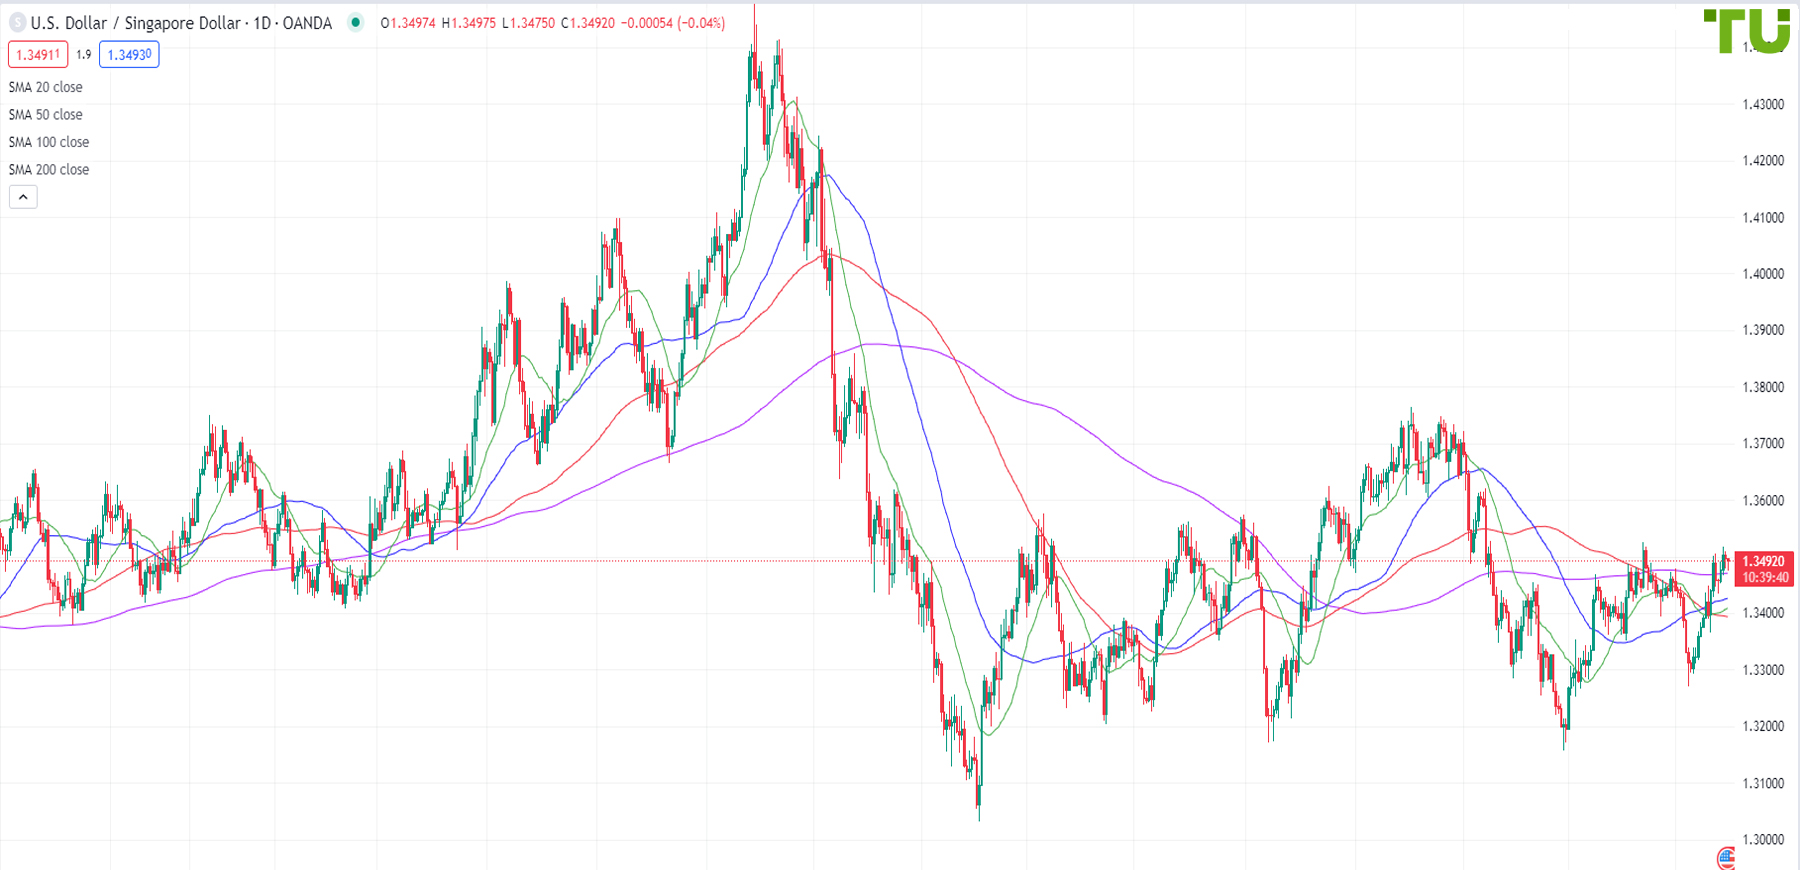 USD/SGD is trying to resume growth